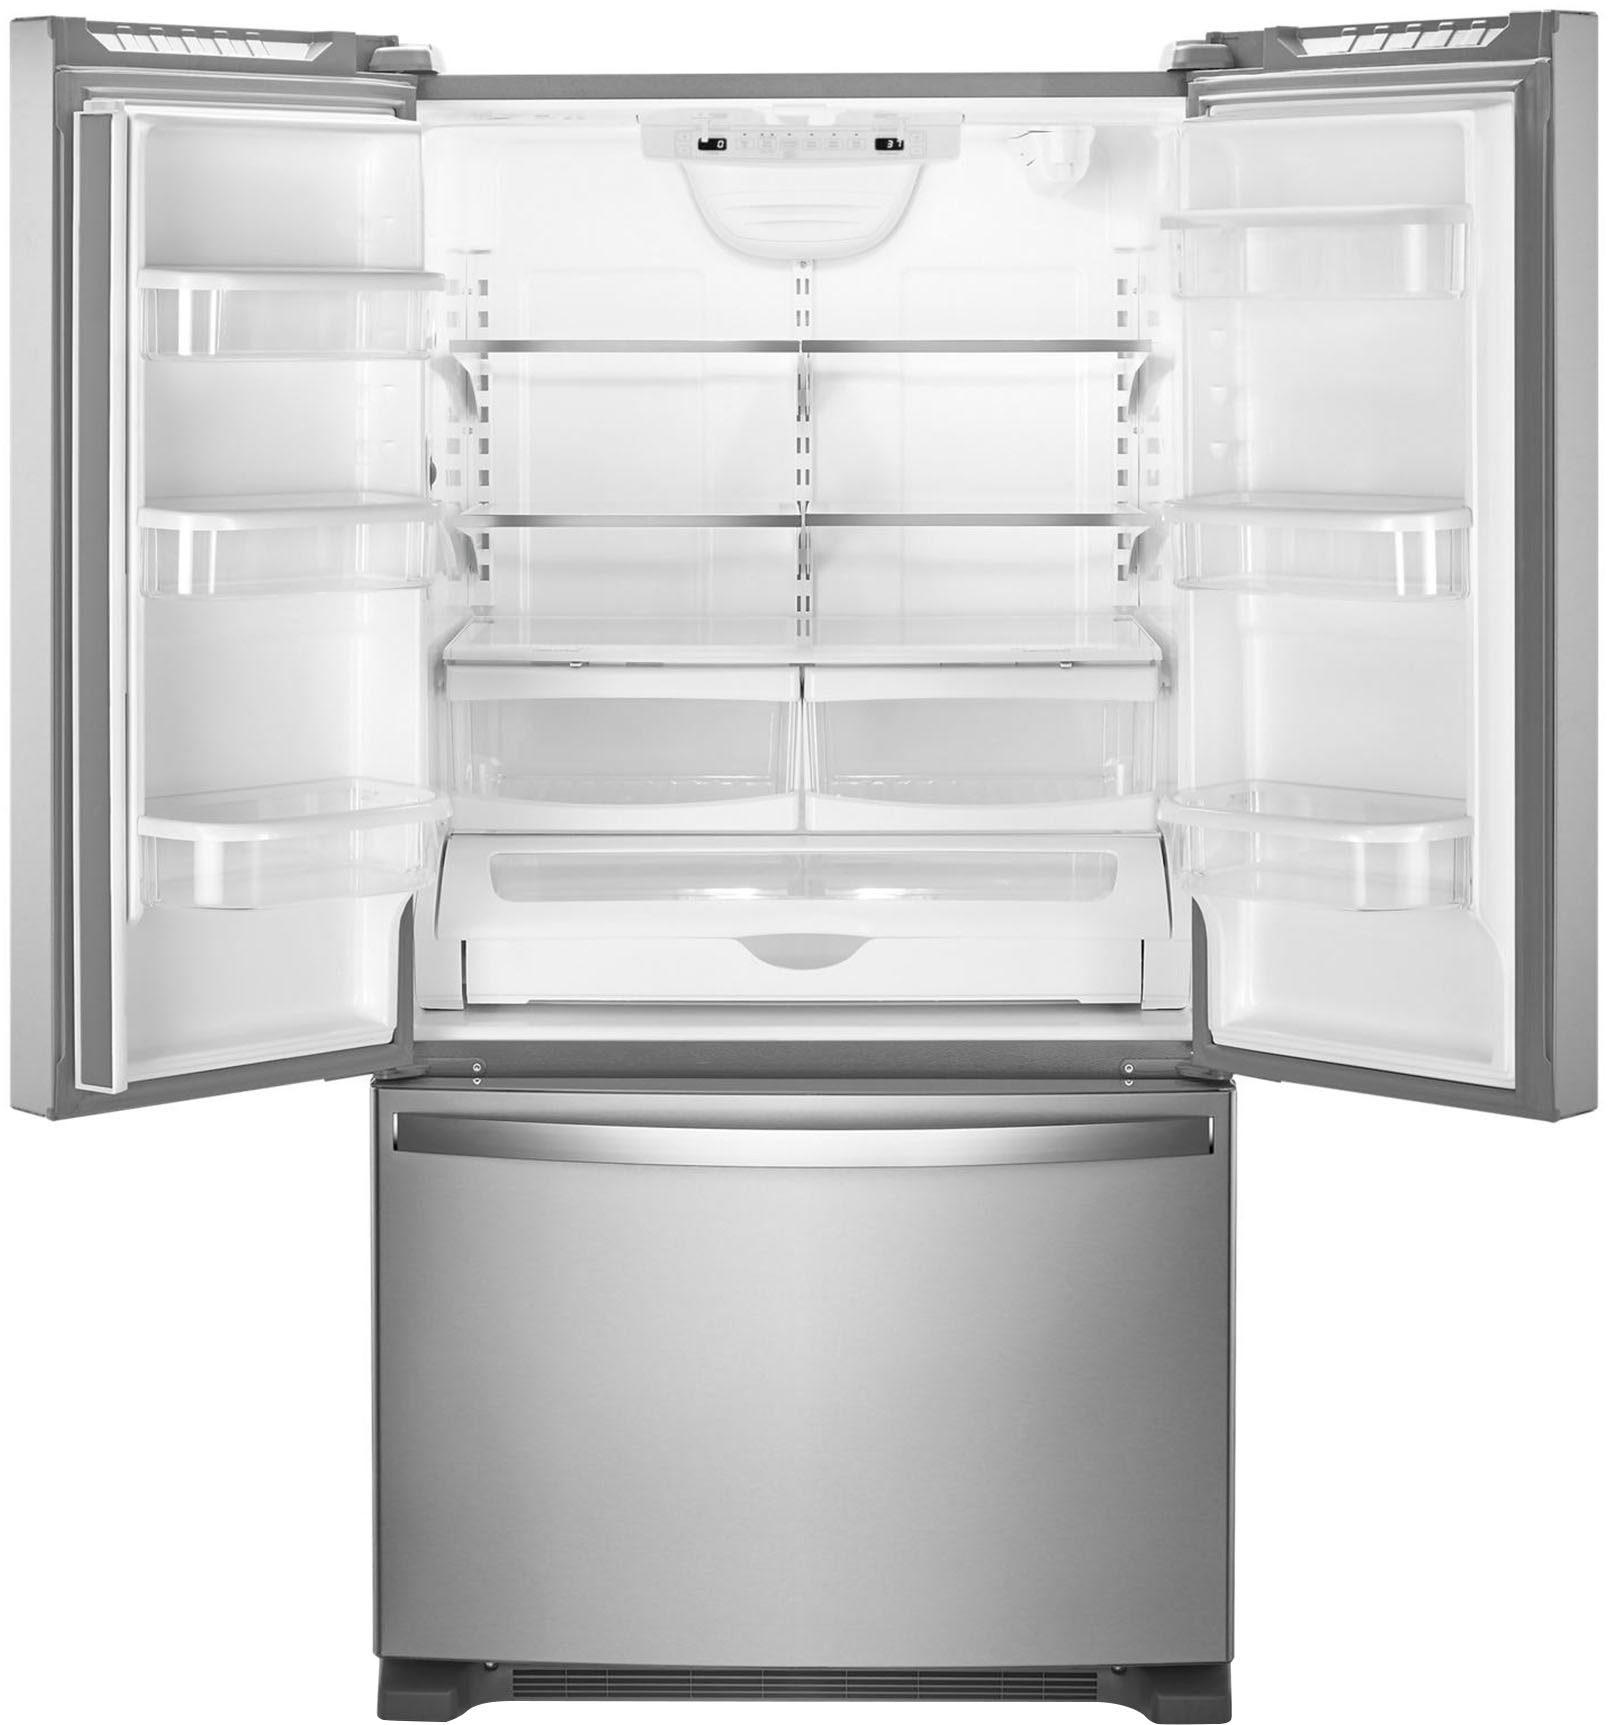 Angle View: Whirlpool - 25.2 Cu. Ft. French Door Refrigerator with Internal Water Dispenser - Stainless Steel